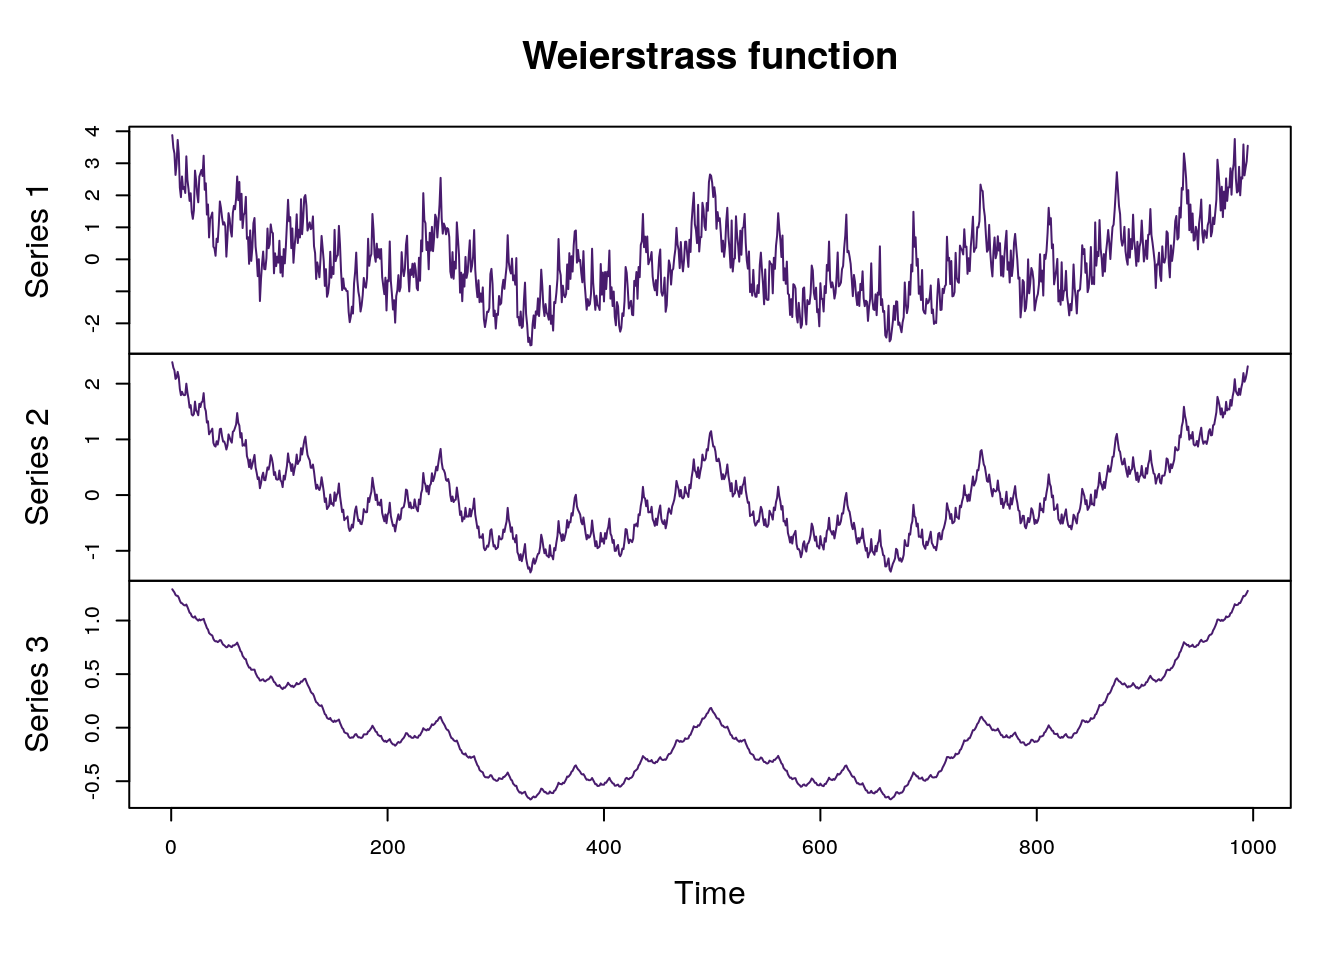 Plot of Weierstrass function with alpha parameters (0.2, 0.42, 0.8)